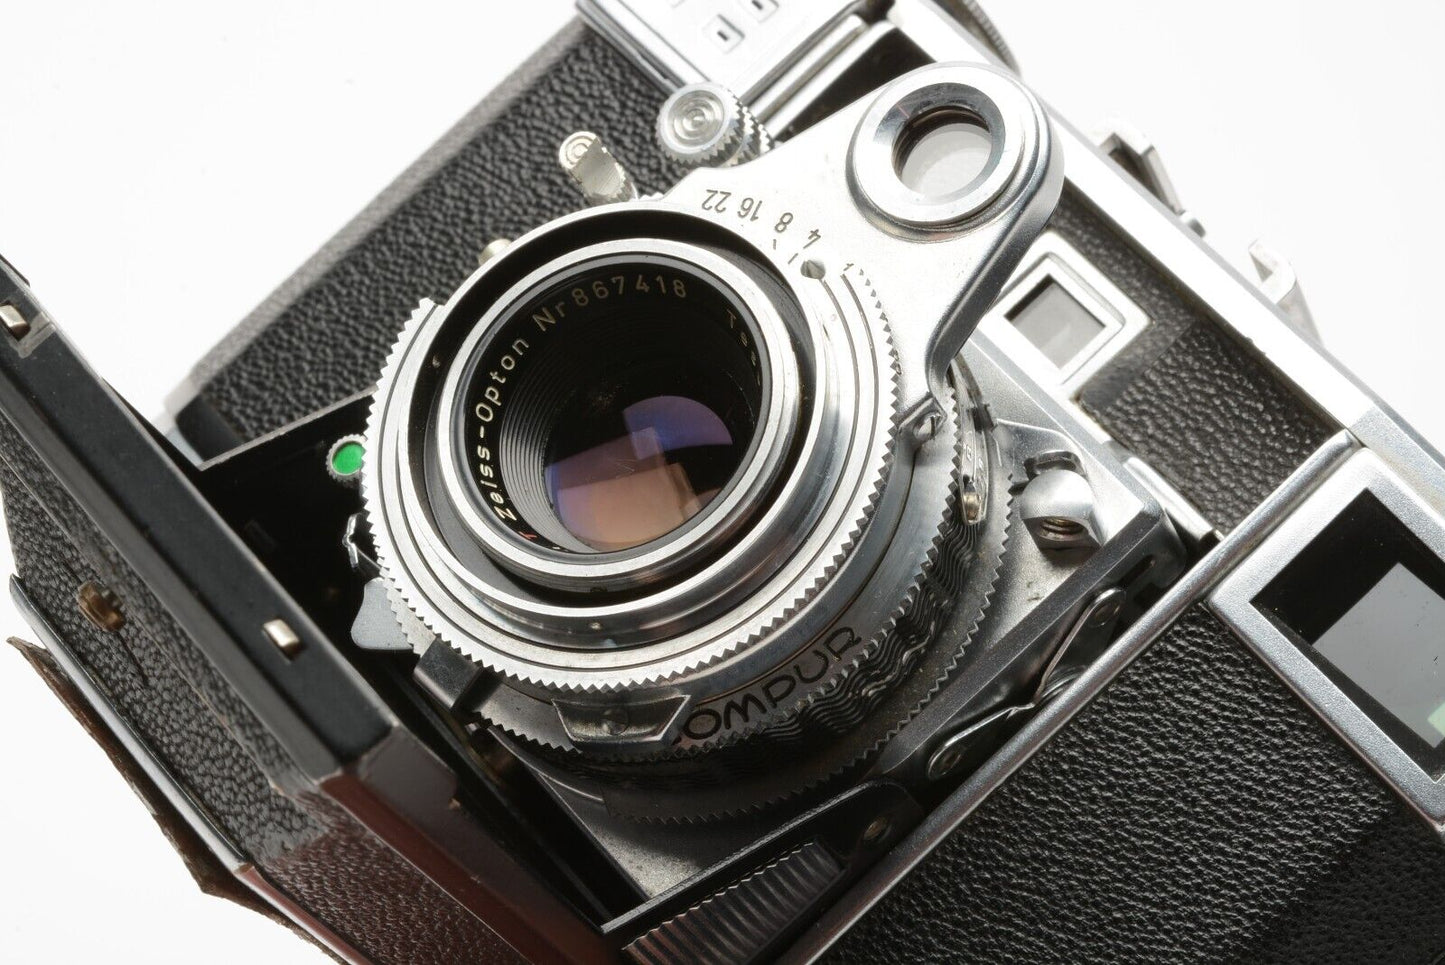 EXC++ ZEISS IKON CONTESSA 35mm CAMERA w/45mm F2.8 LENS, TESTED, WORKS GREAT!